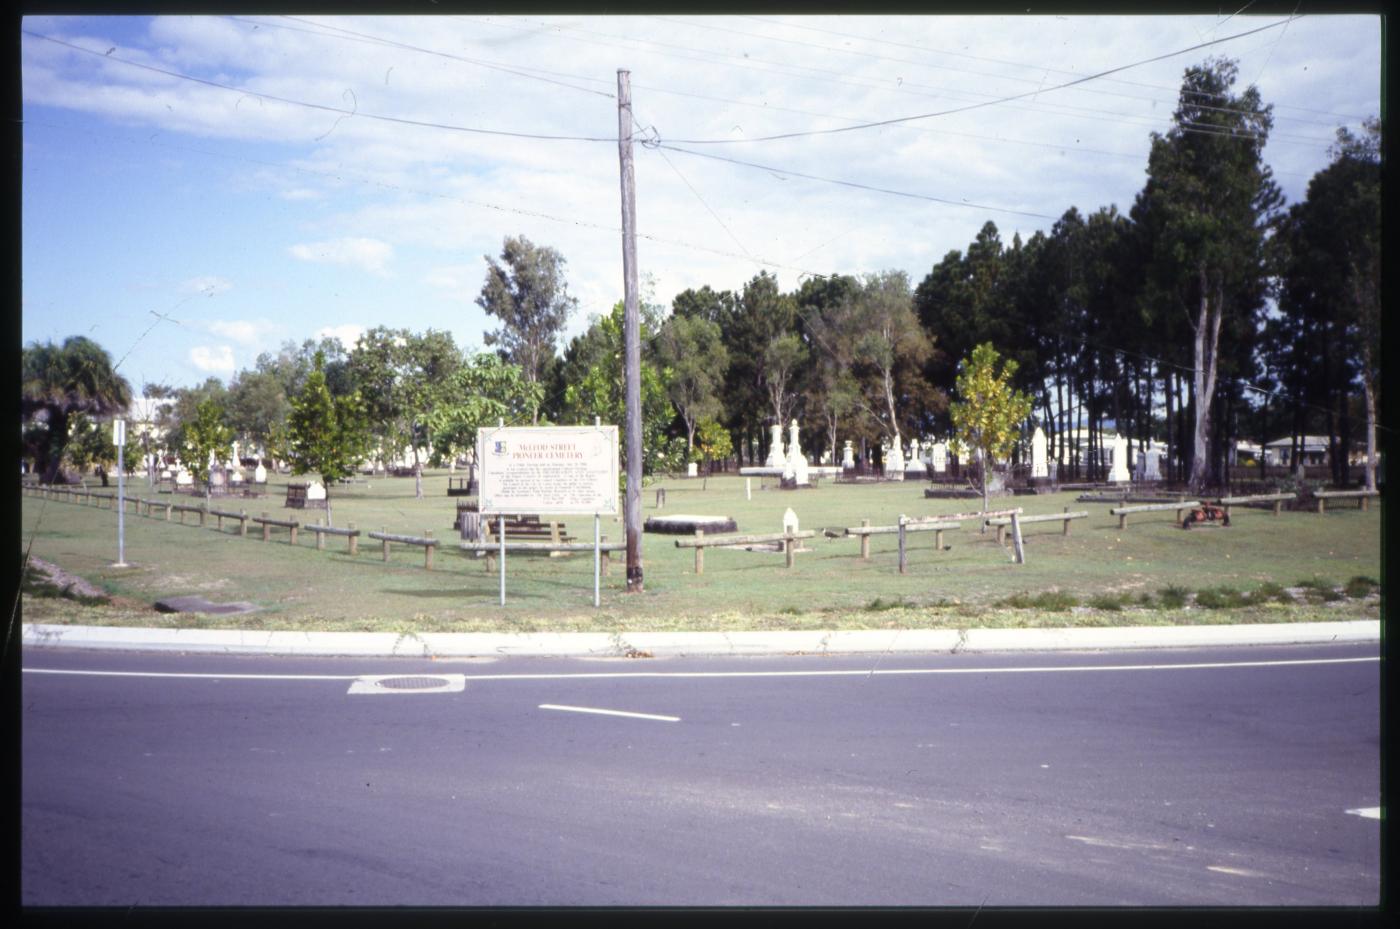 Cairns Pioneer Cemetery from the North